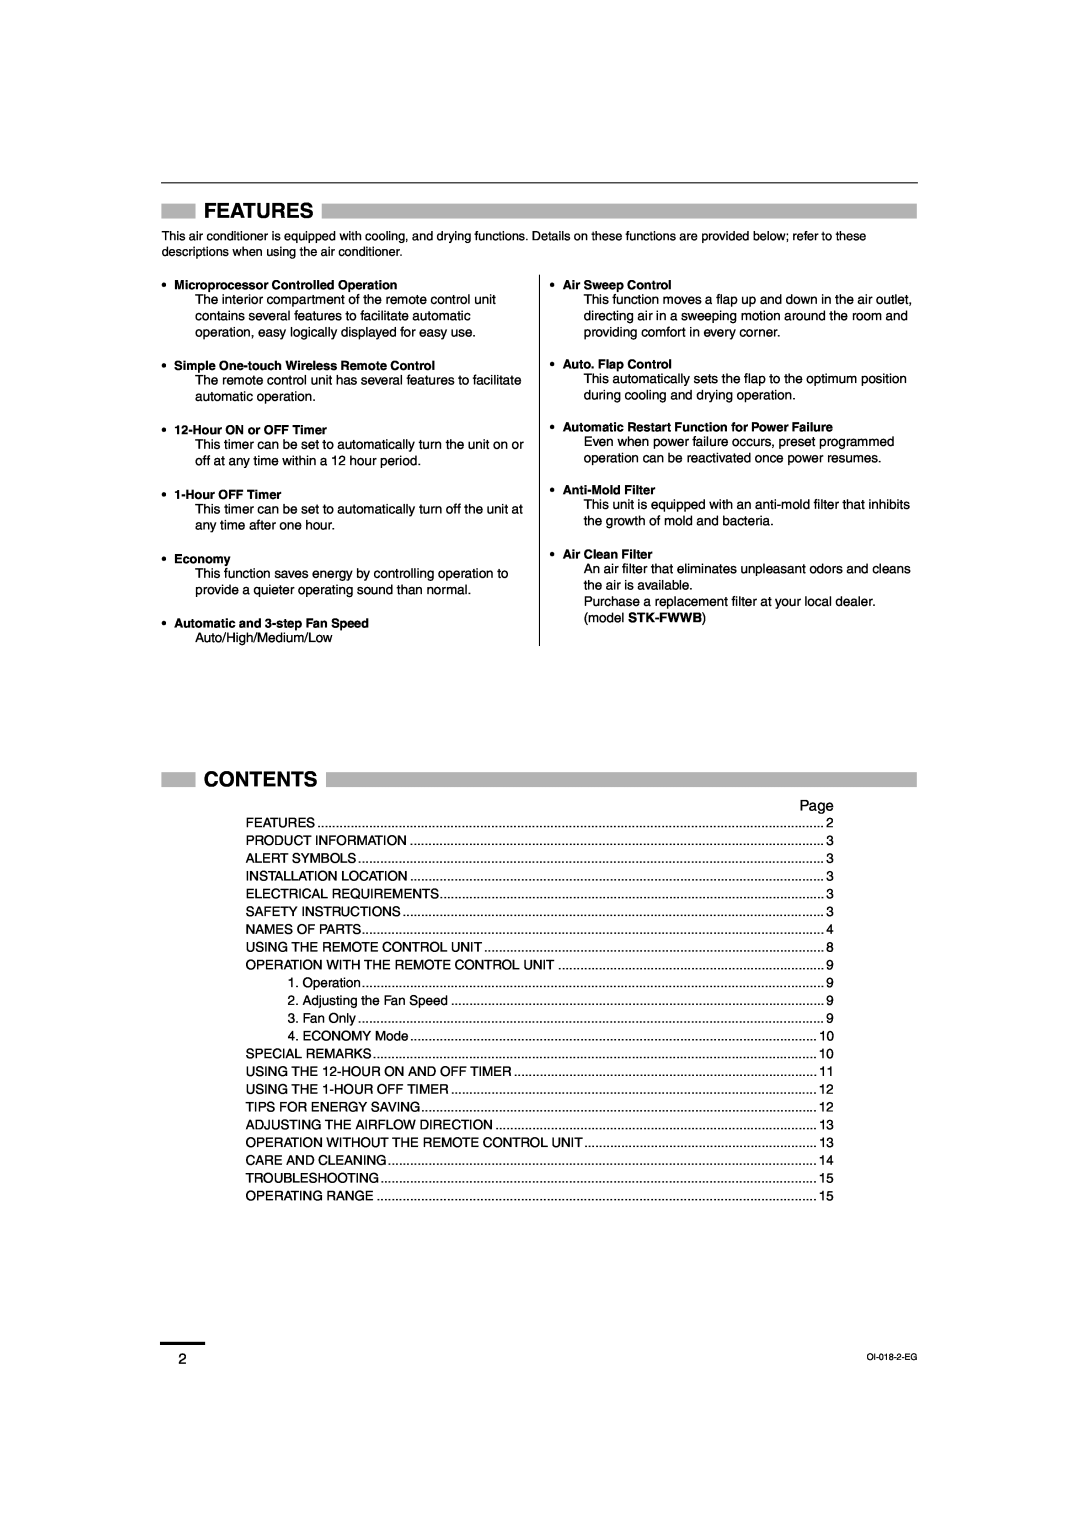 Sanyo SAP-K77RAX, Sanyo Split System Air Conditoner service manual Features, Contents, Page 